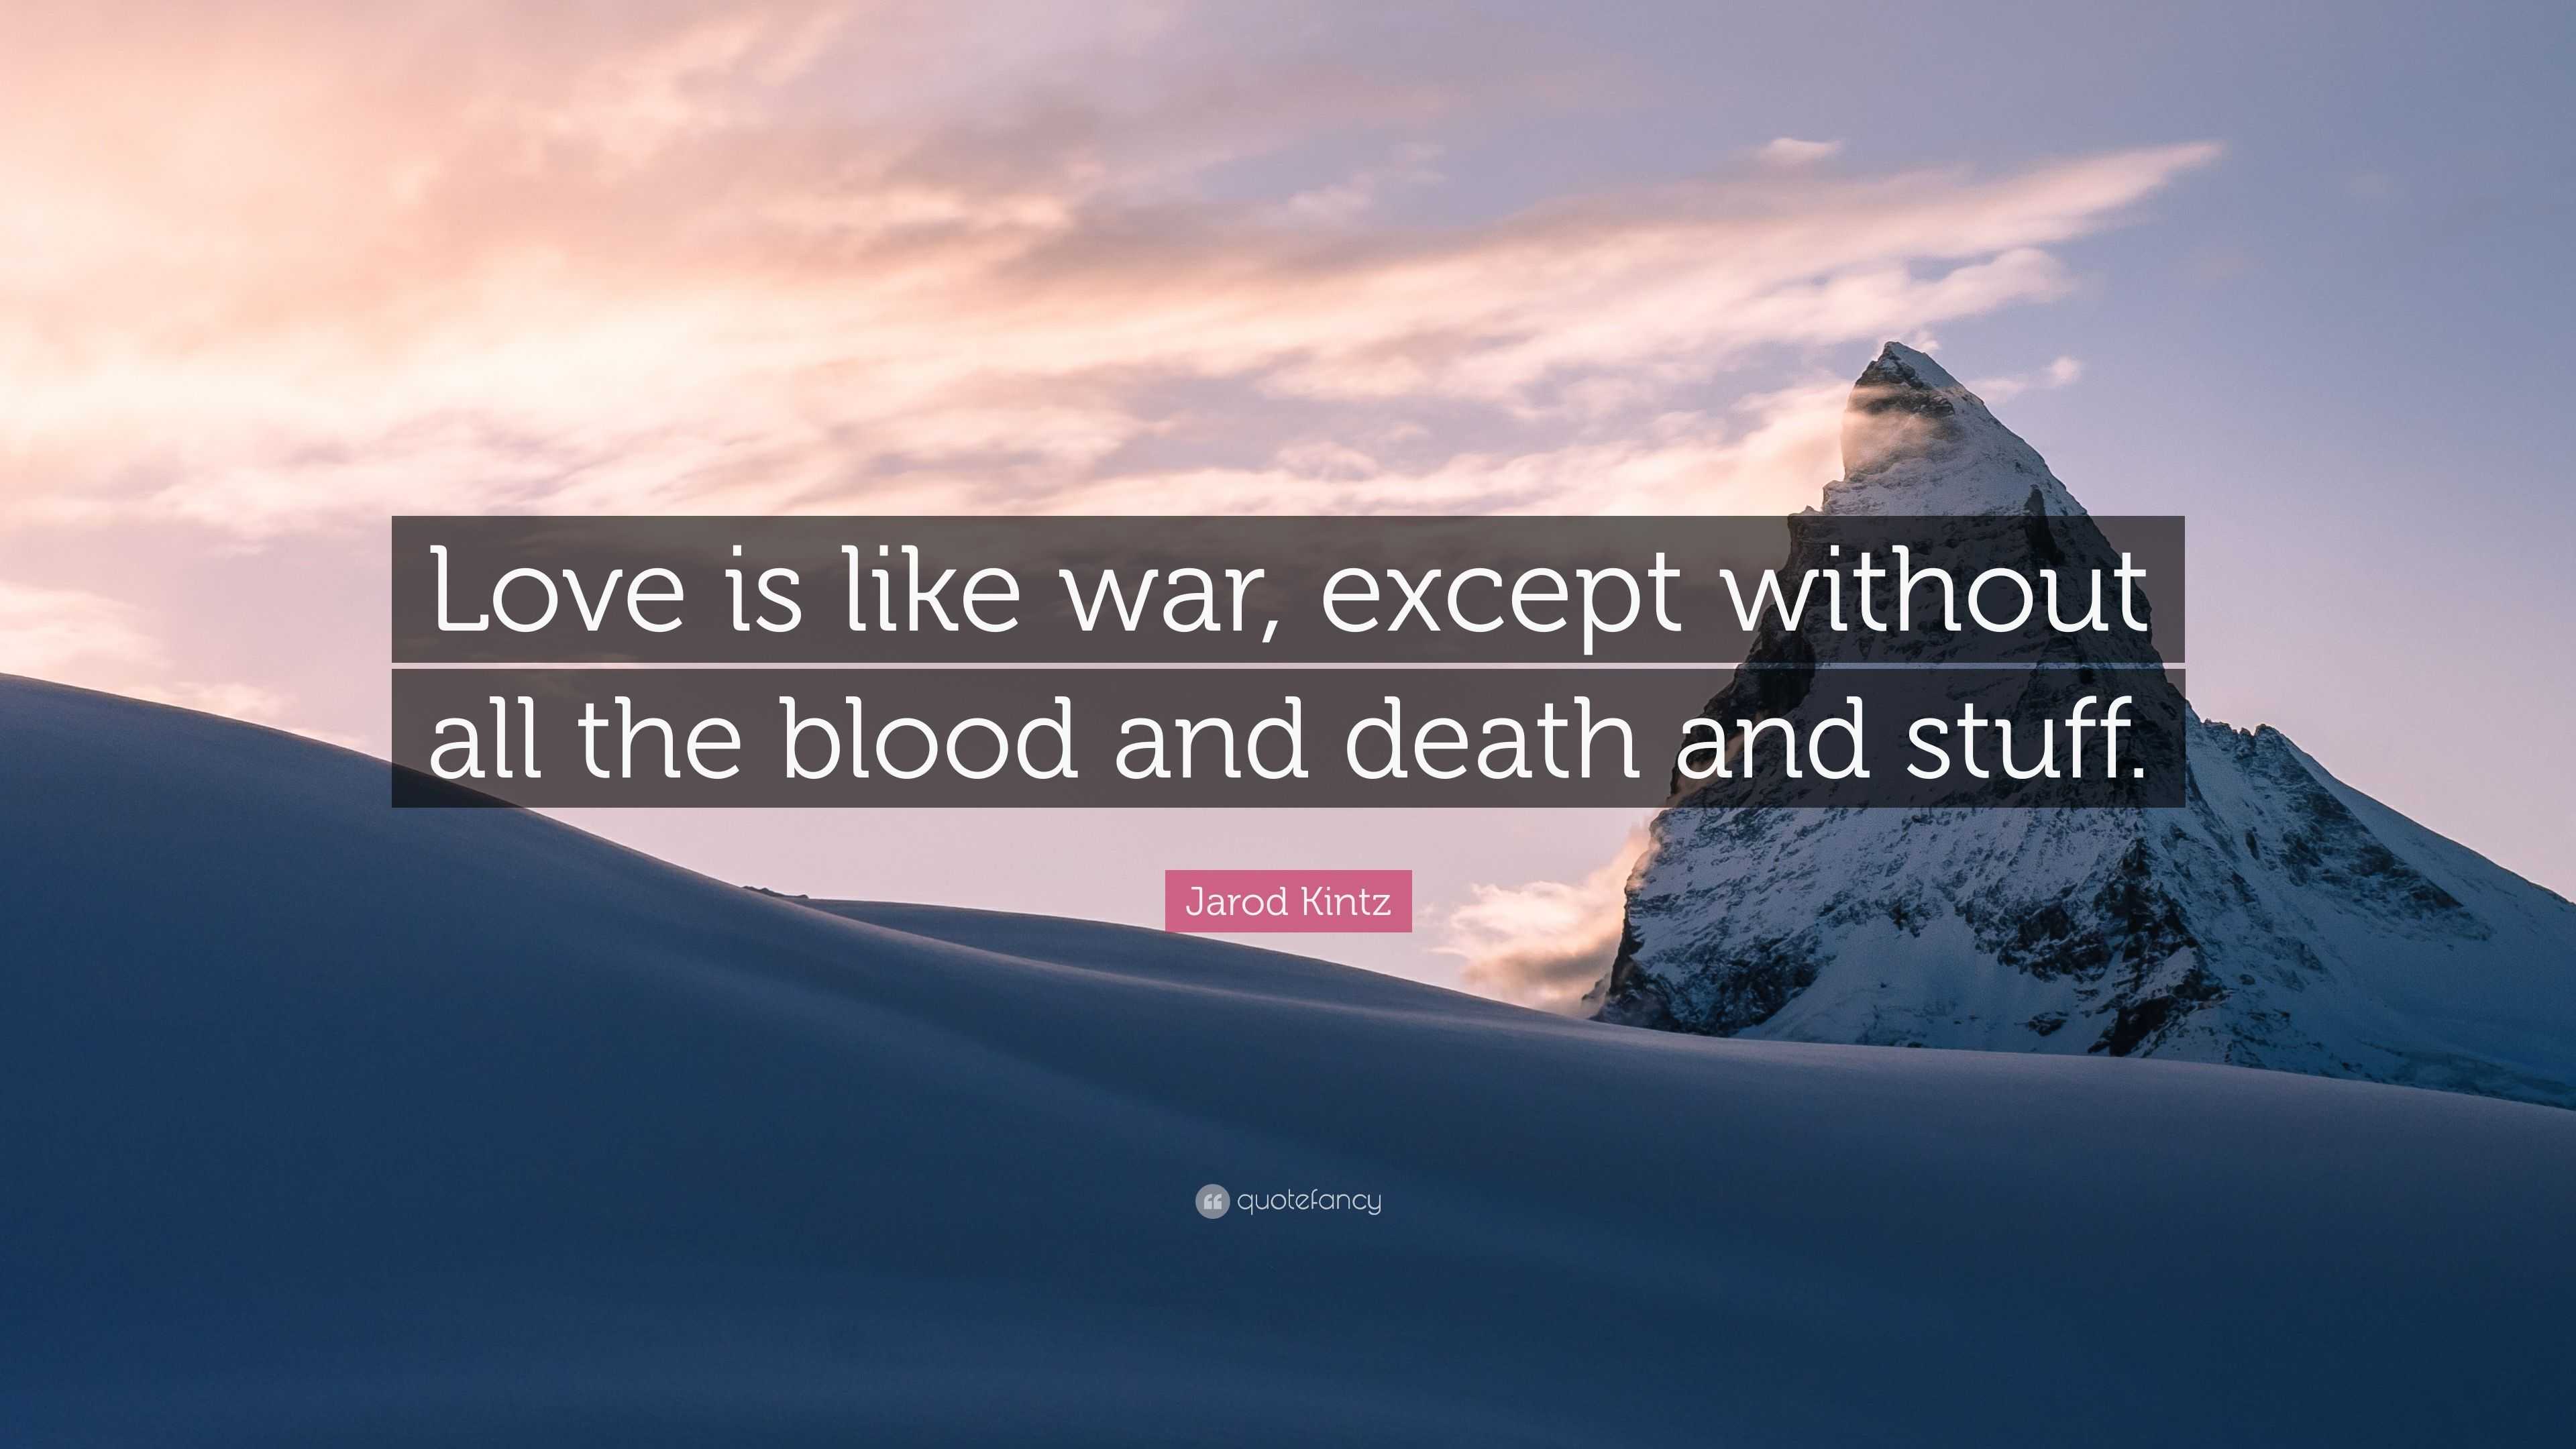 Jarod Kintz Quote “Love is like war except without all the blood and